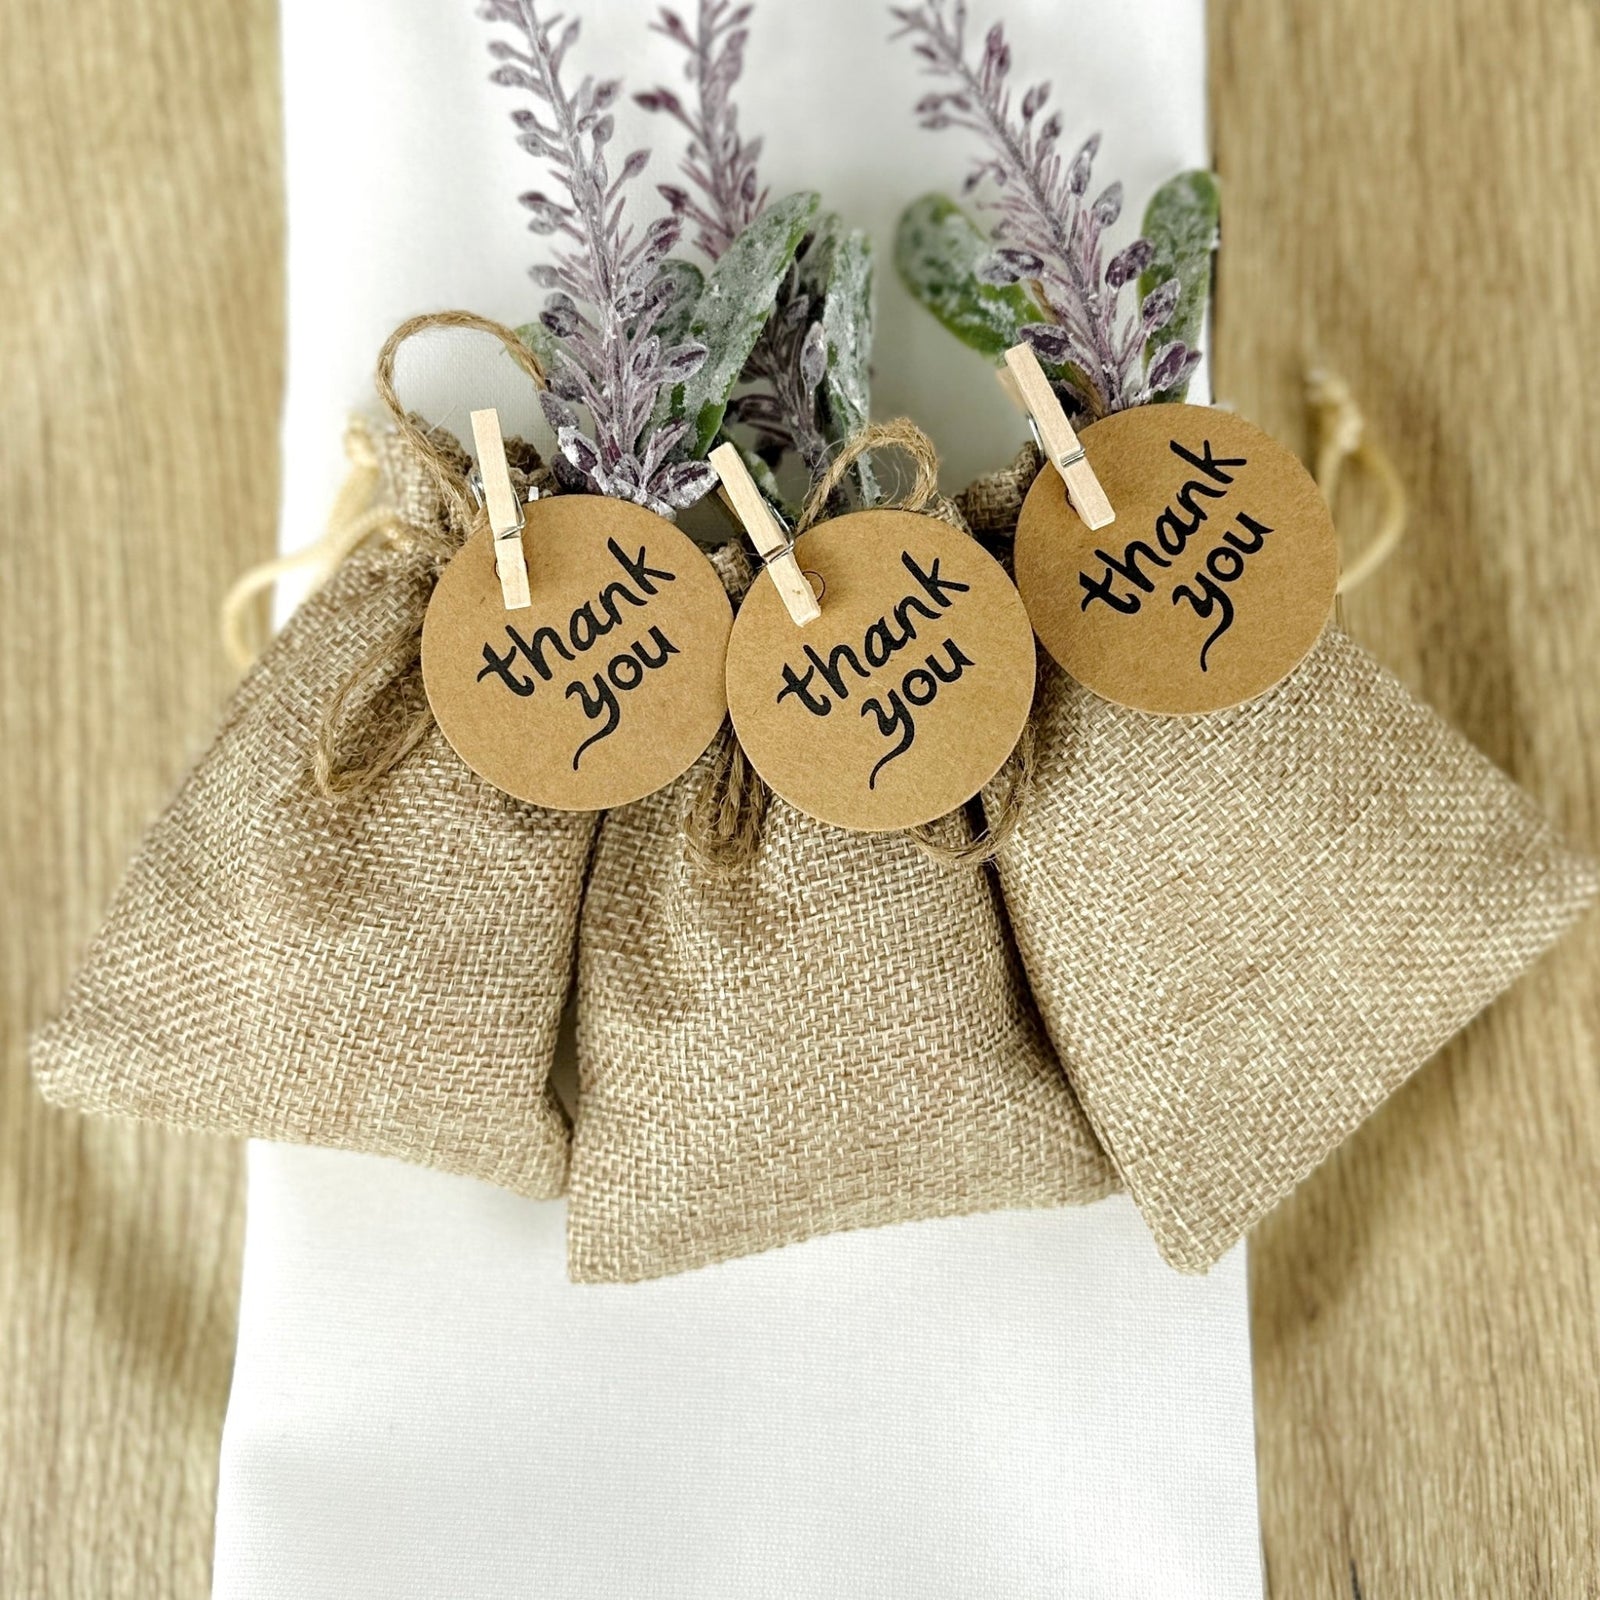 75+ Cheap Wedding Favors You'll Be Surprised Are Less than $2